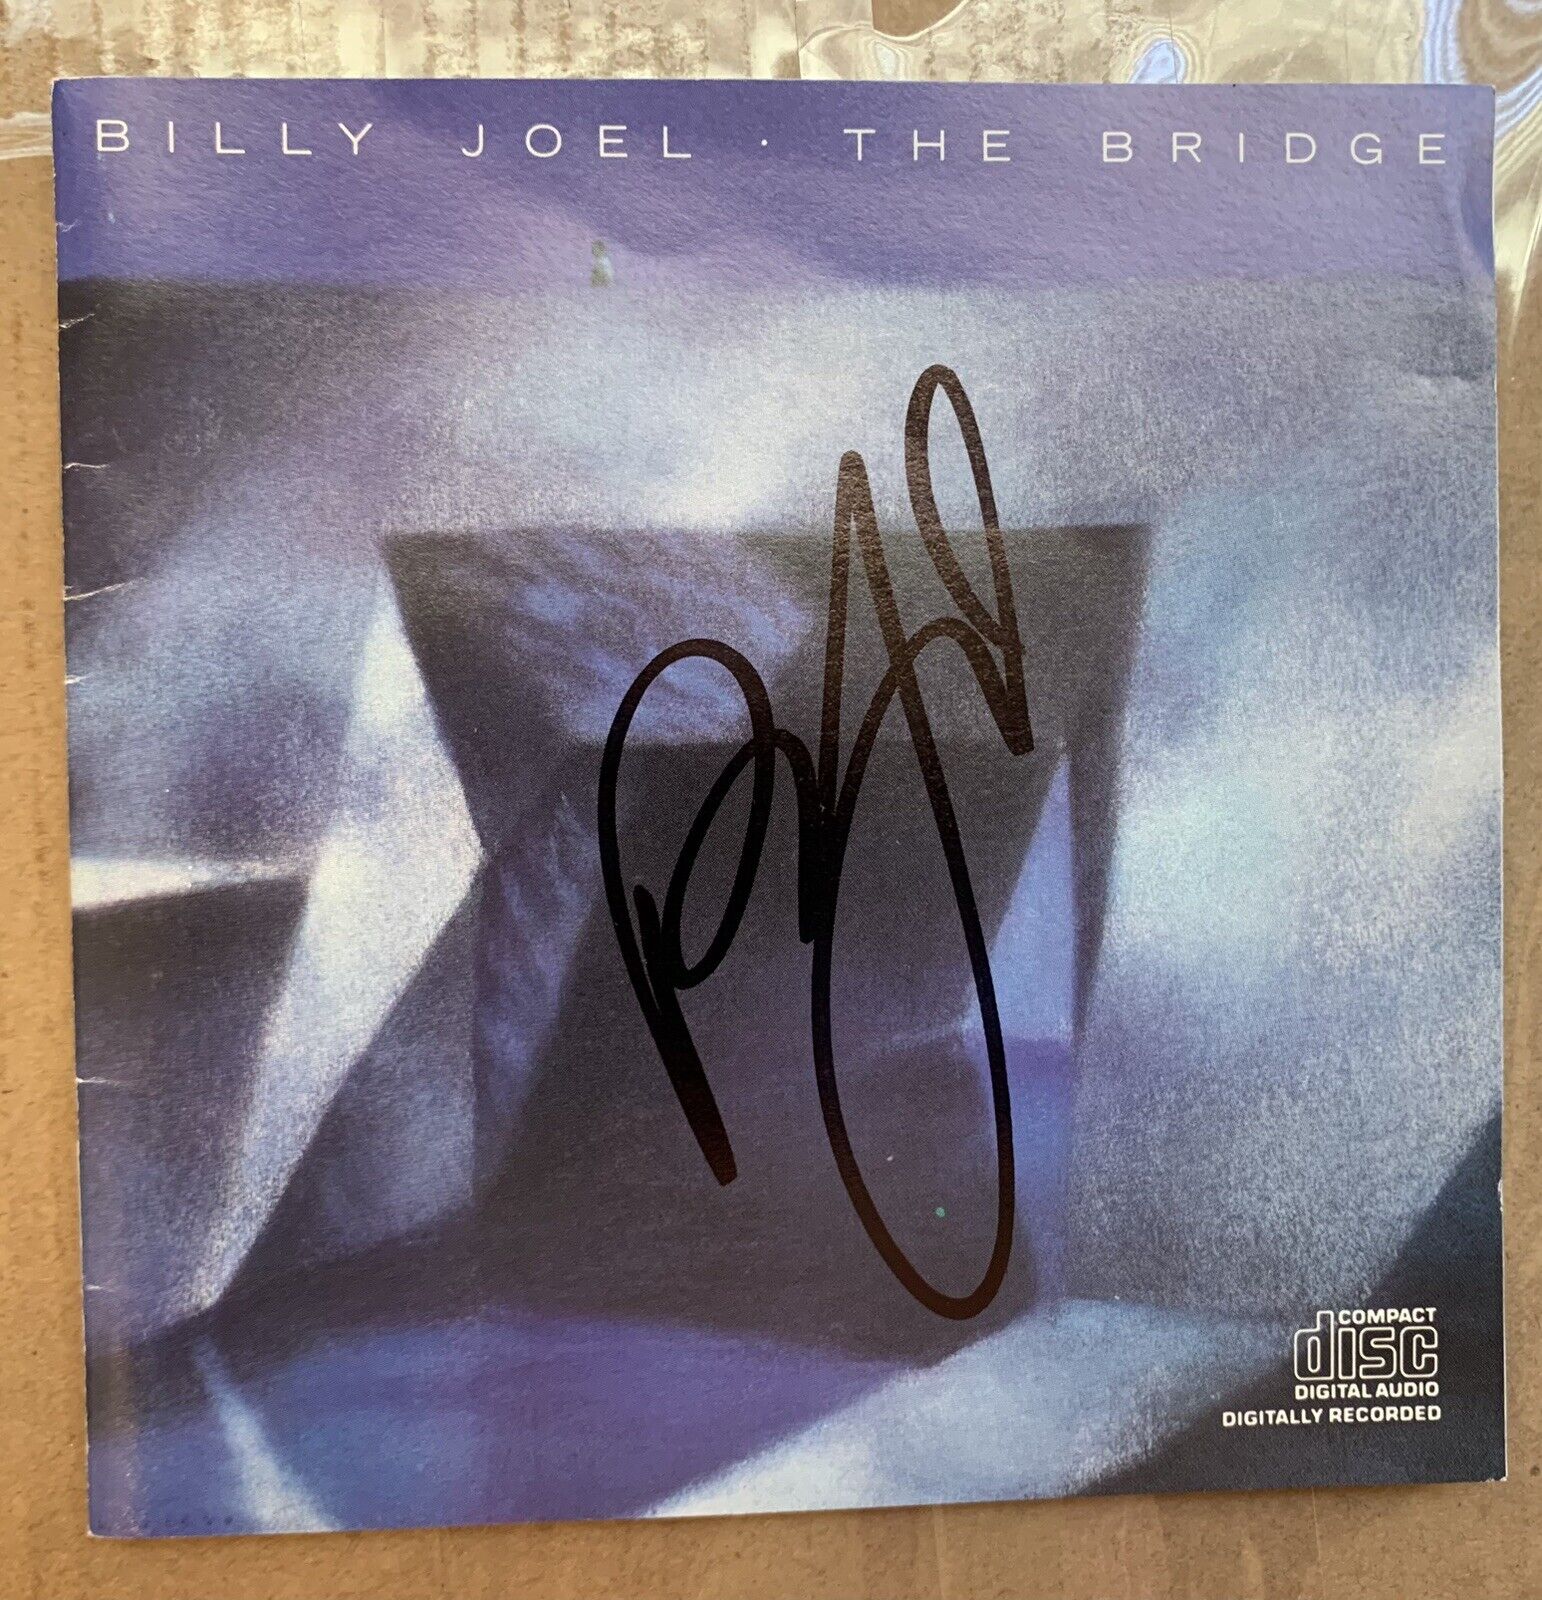 Billy Joel Autographed CD of The Bridge .  Obtained after MSG show by huge fan.